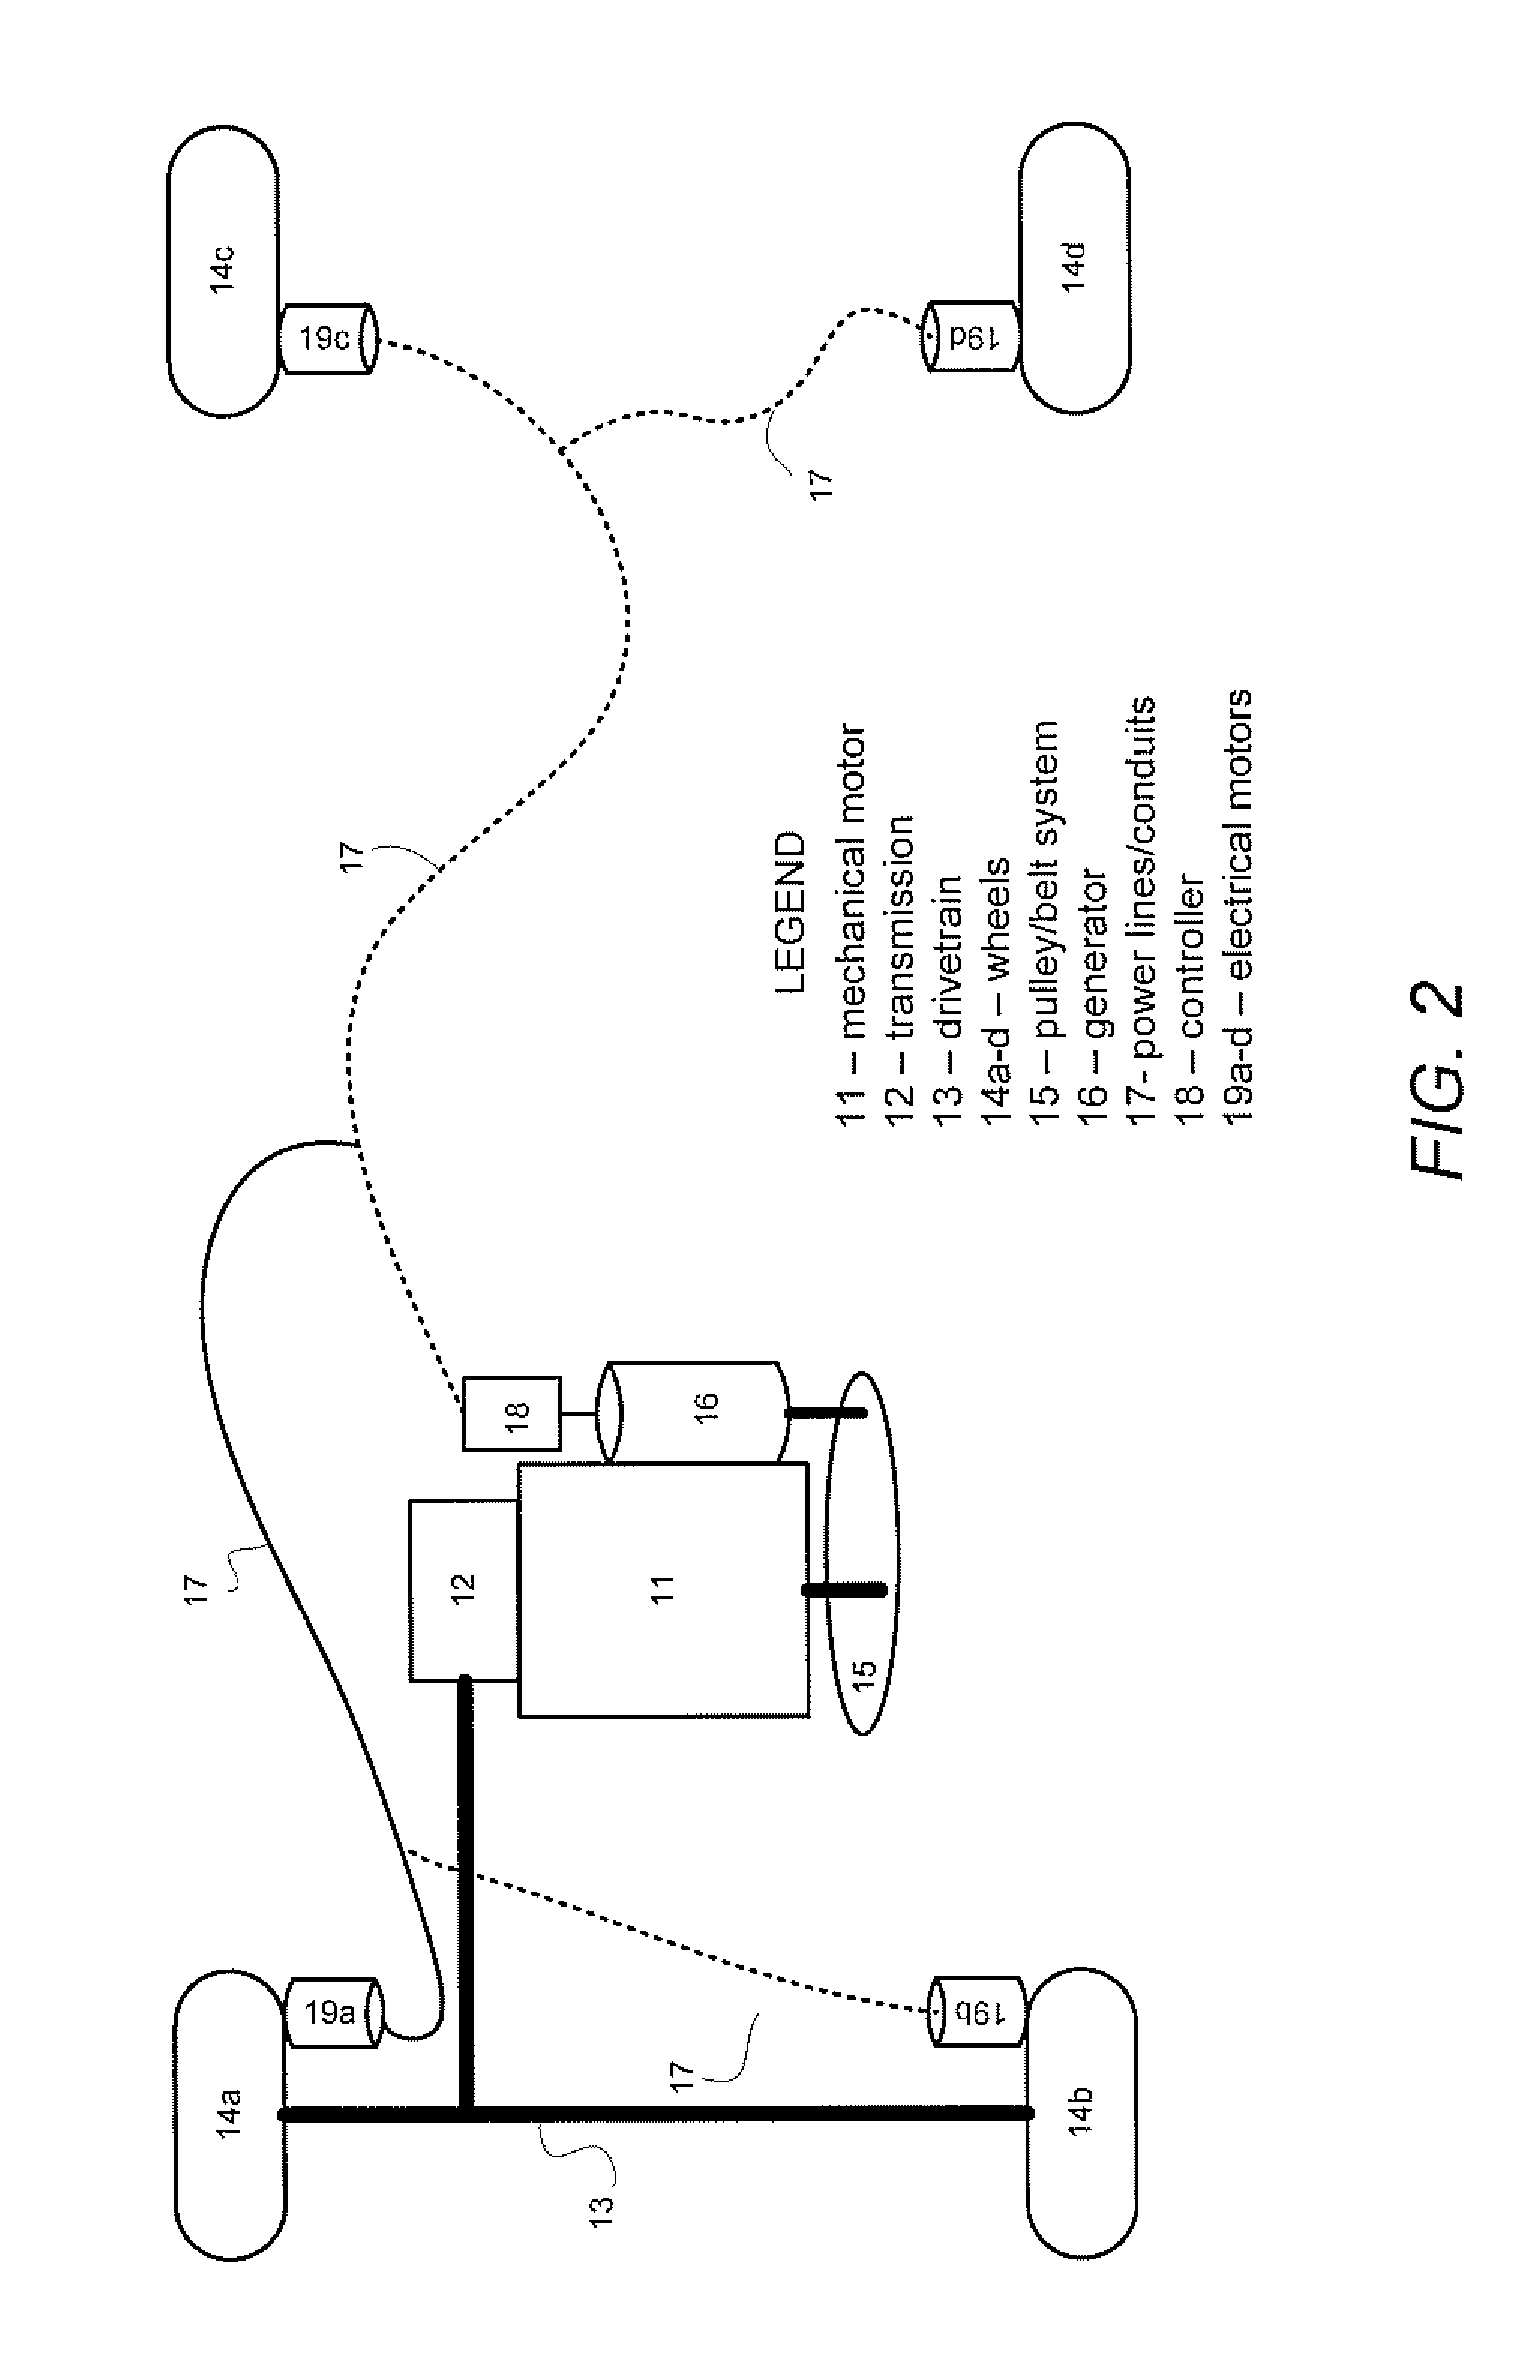 Operating method and system for hybrid vehicle